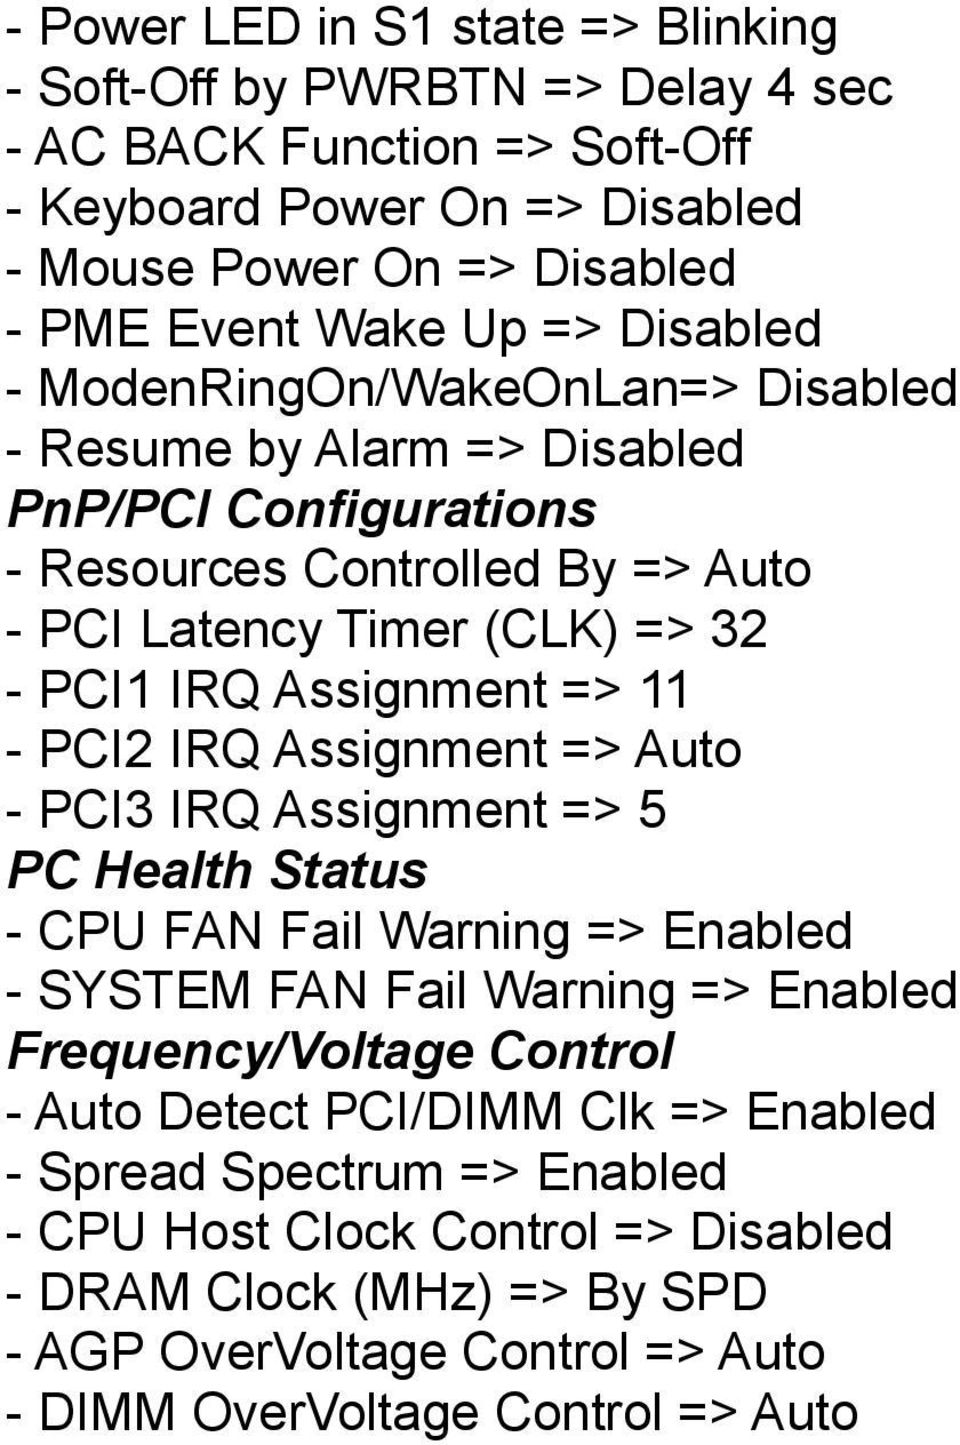 11 - PCI2 IRQ Assignment => Auto - PCI3 IRQ Assignment => 5 PC Health Status - CPU FAN Fail Warning => Enabled - SYSTEM FAN Fail Warning => Enabled Frequency/Voltage Control - Auto Detect